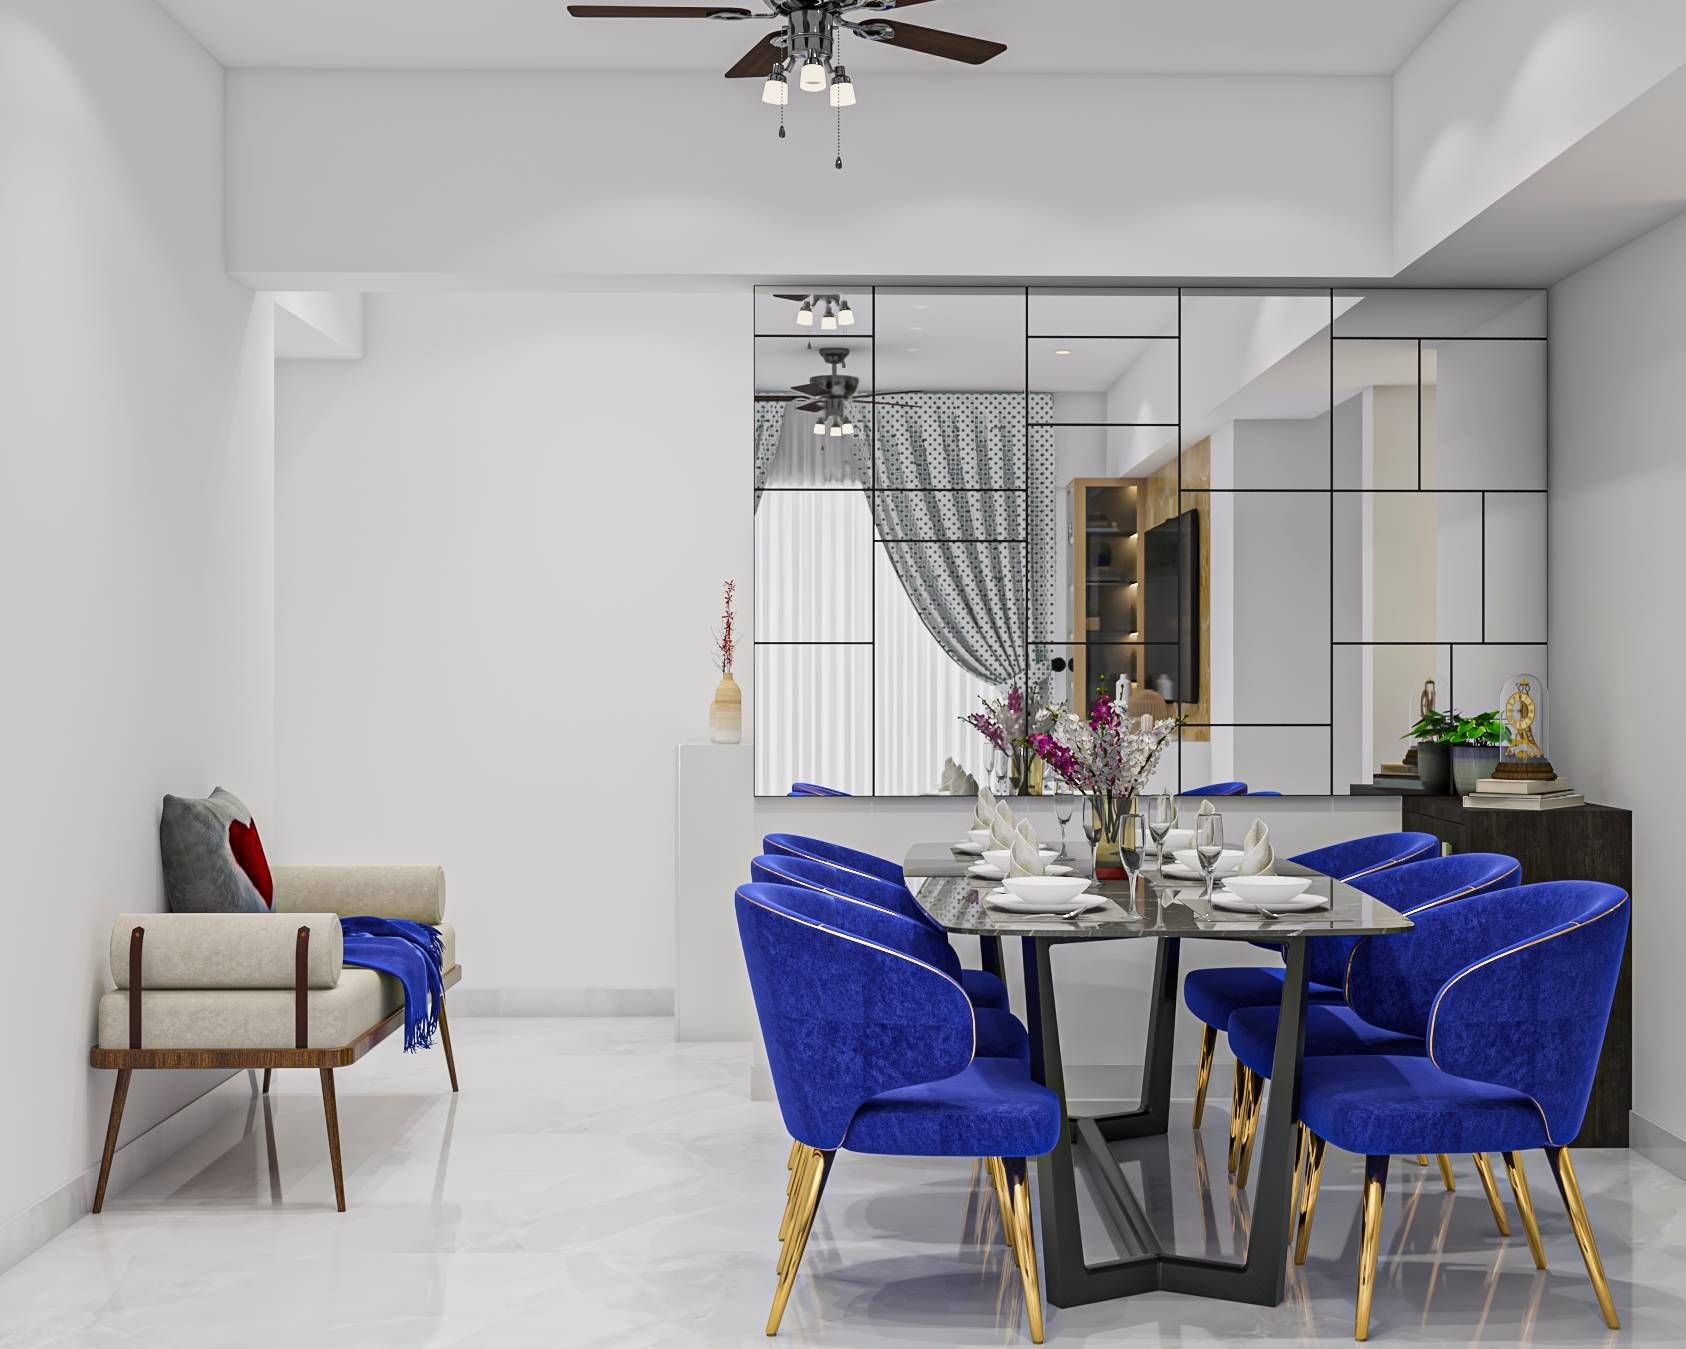 Contemporary 6-Seater Dining Room Design With Blue Tufted Chairs